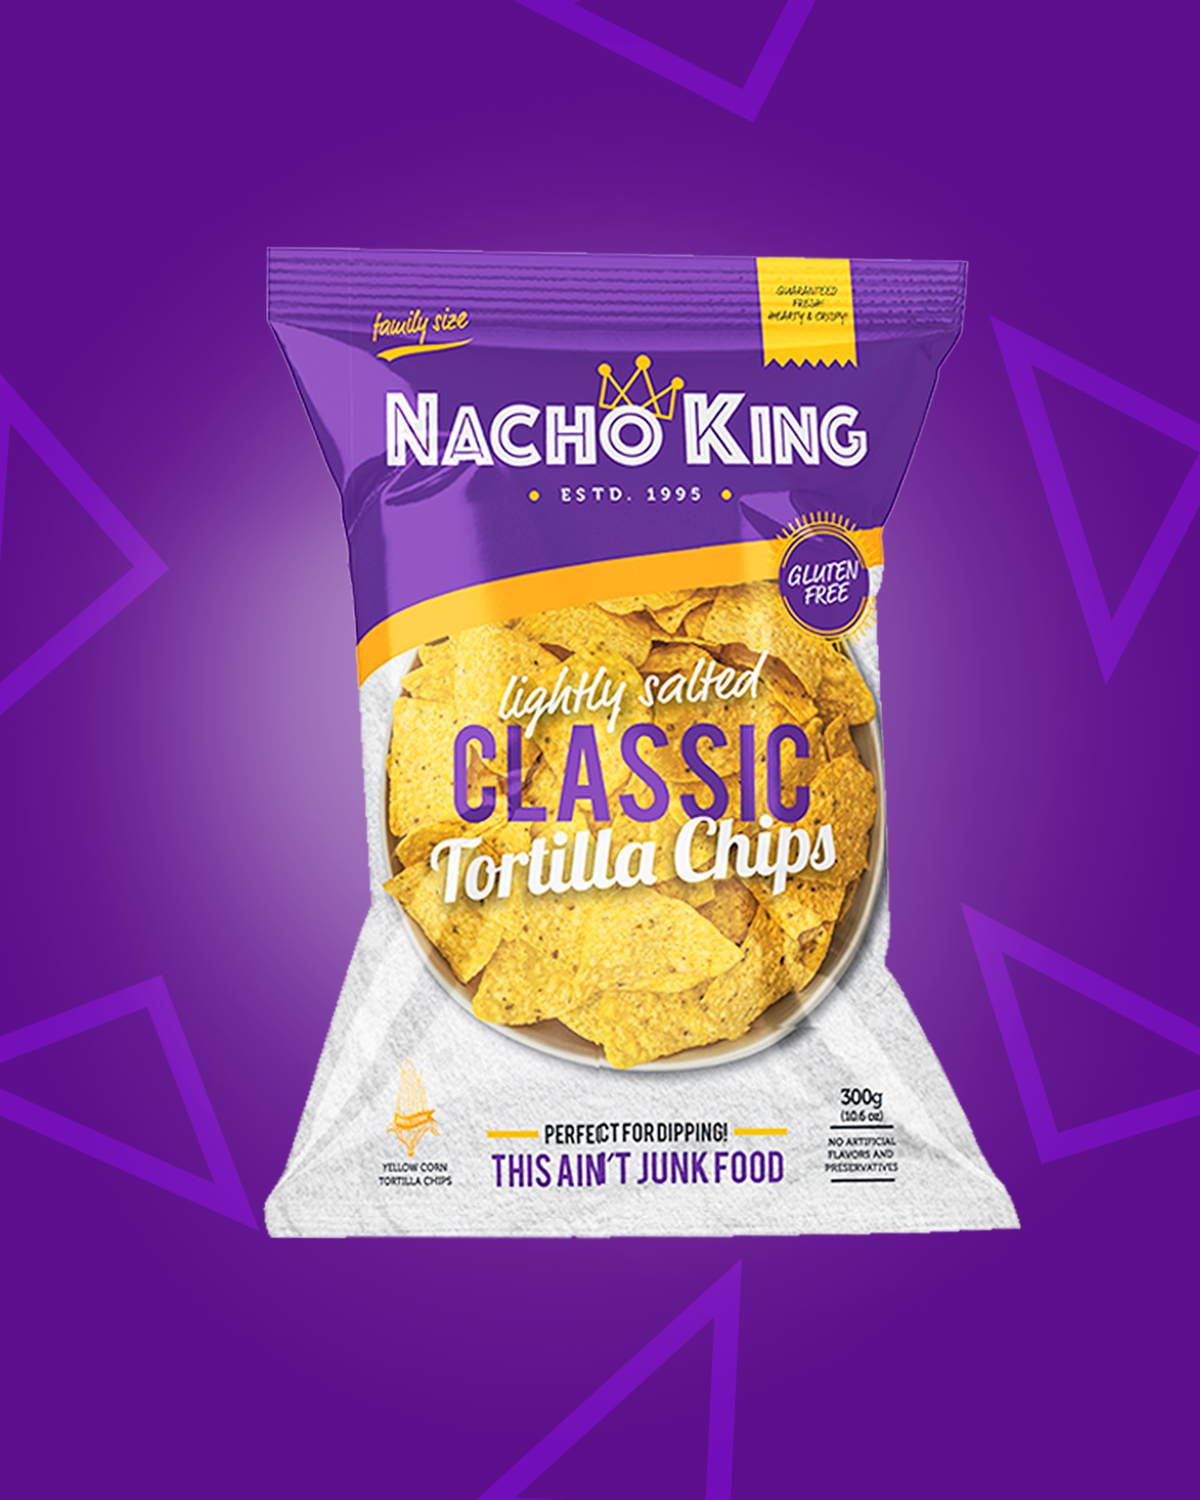 A pack of Nacho King Lightly Salted Tortilla Chips, Local Corn Chips